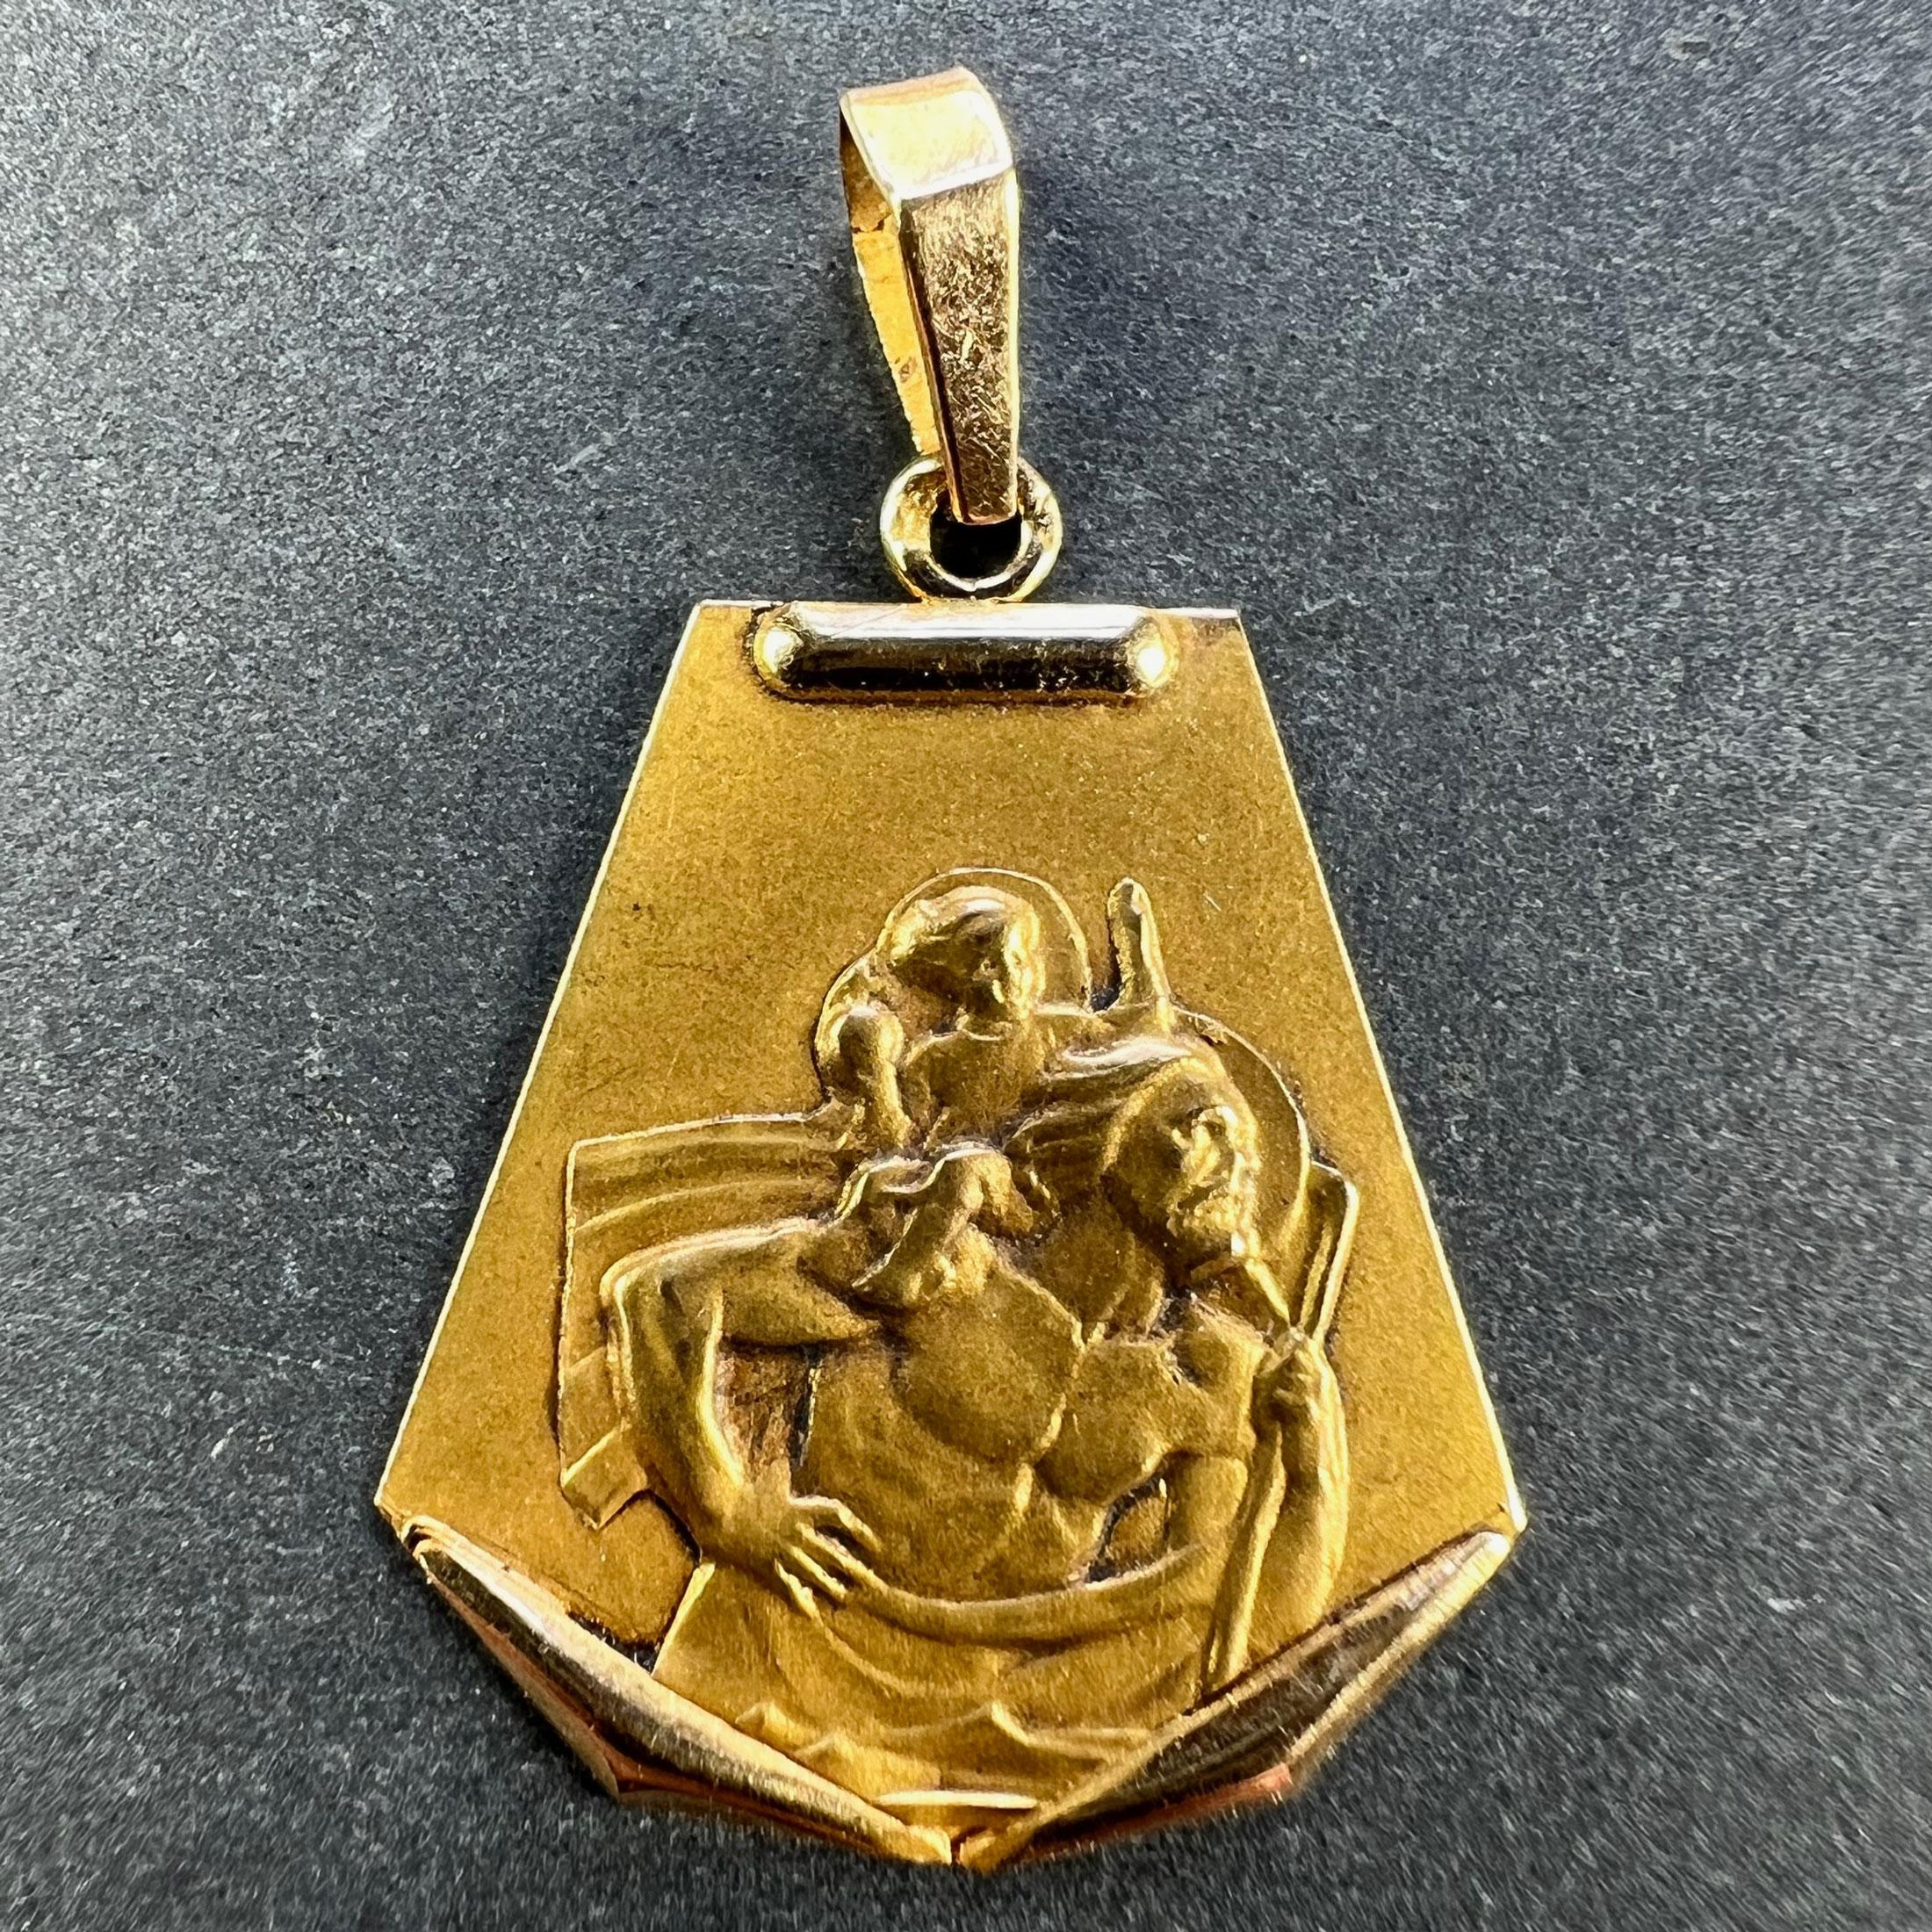 A vintage French 18 karat (18K) yellow gold charm pendant or medal depicting St Christopher carrying the infant Christ across the river. Partially stamped with the eagle's head for French manufacture.

Dimensions: 2.4 x 1.9 x 0.1 cm (not including